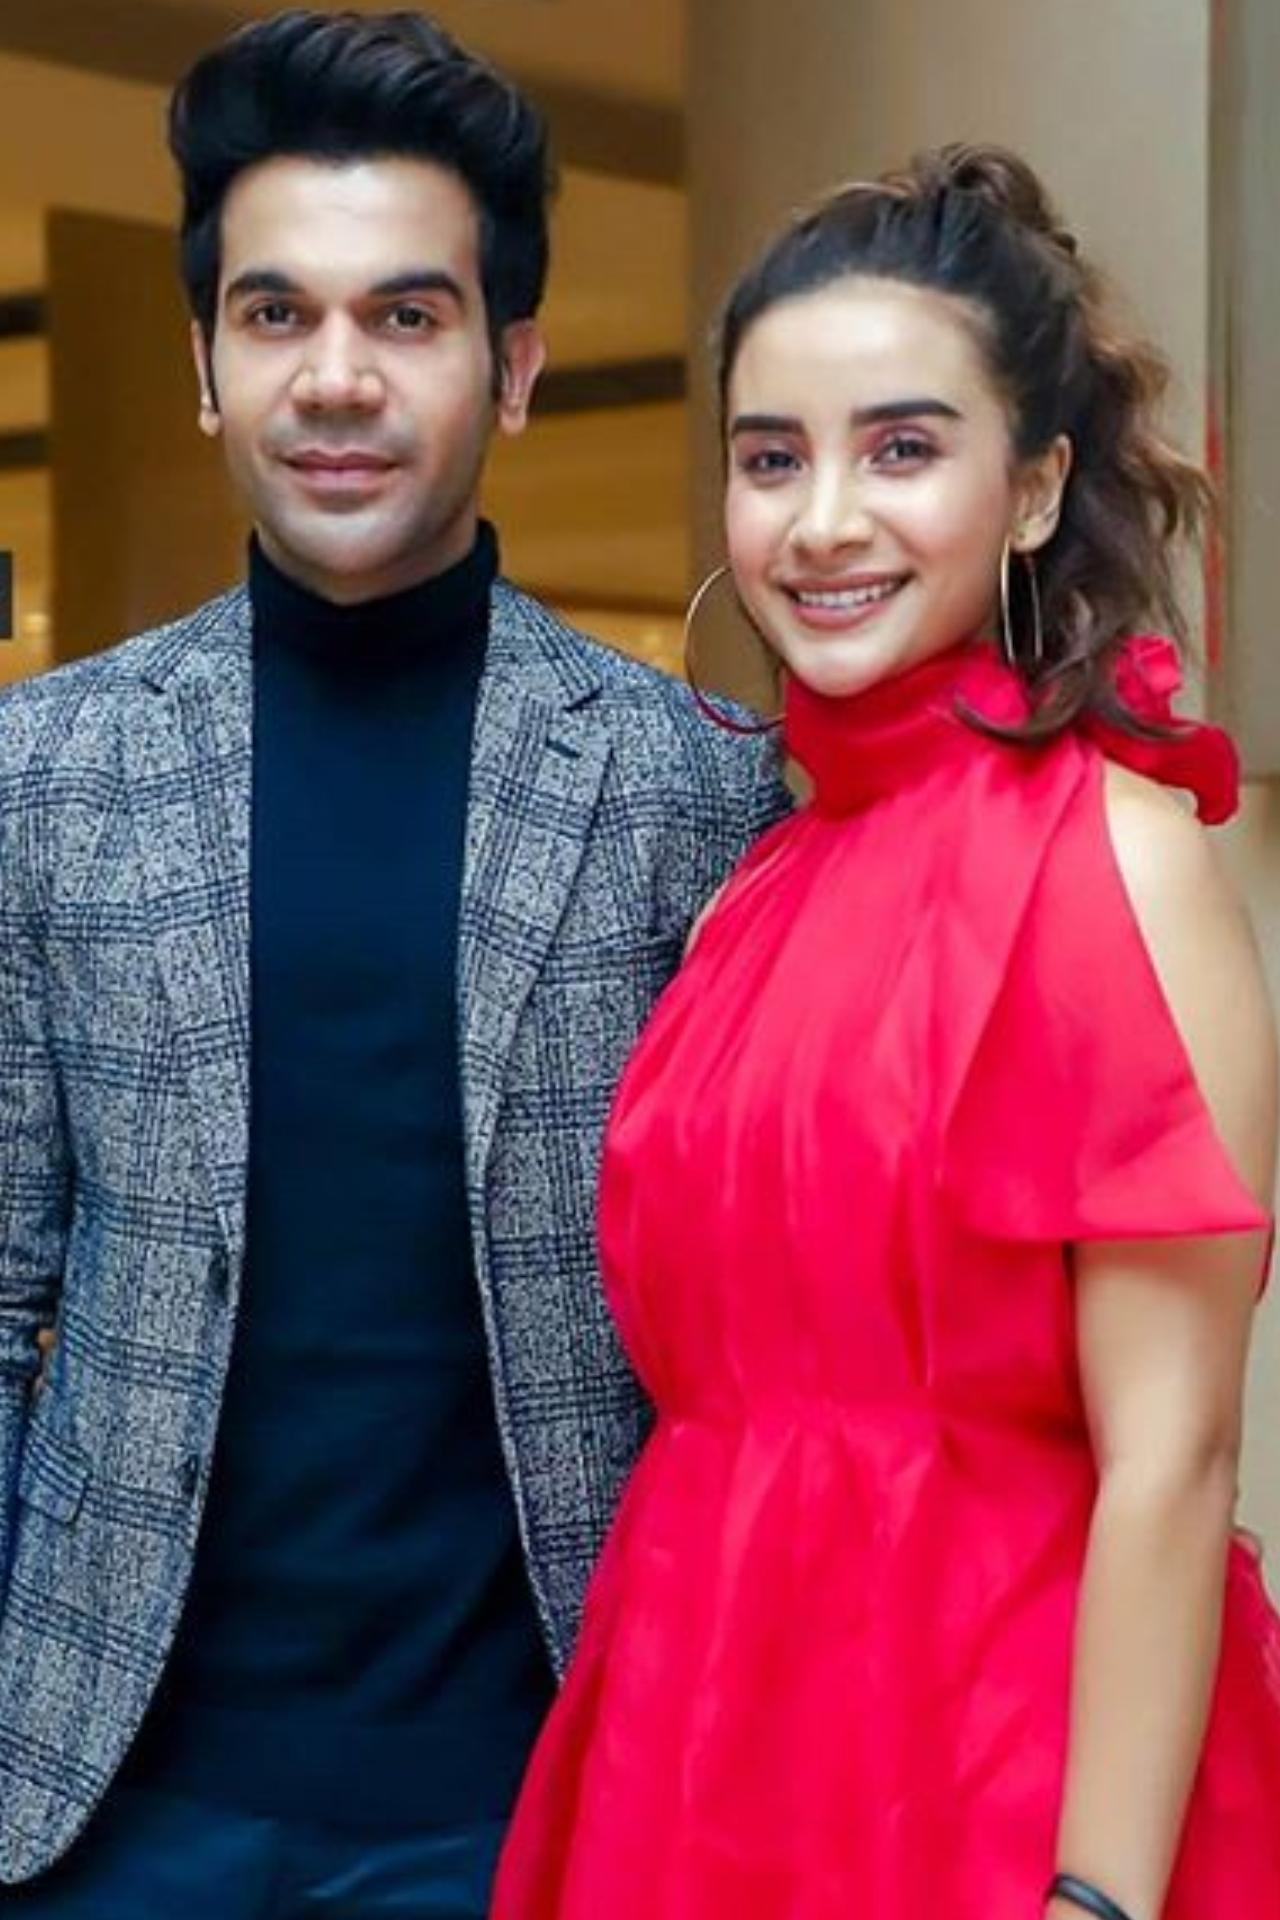 Rajkummar Rao and Patralekhaa are just adorable together and these pictures are proof!